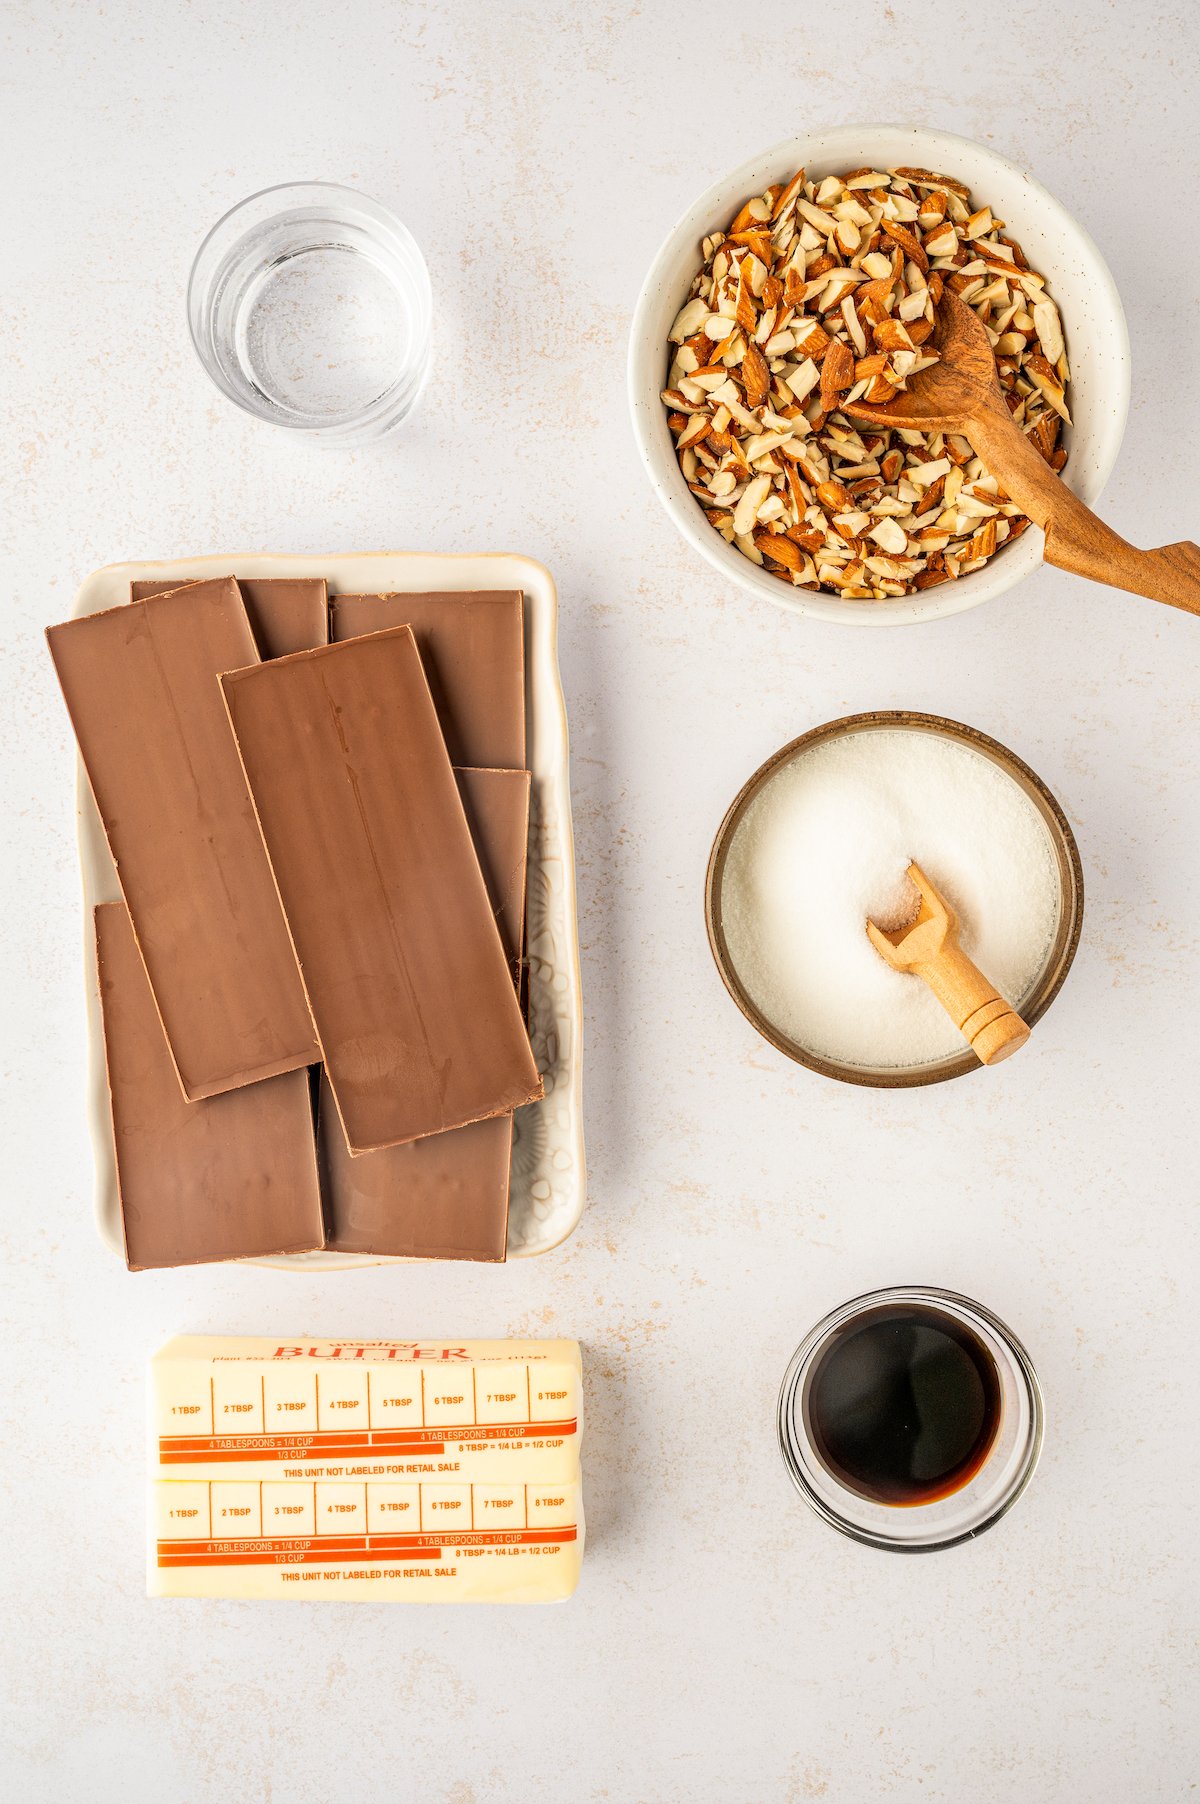 Ingredients for Almond Roca bark arranged on a table.